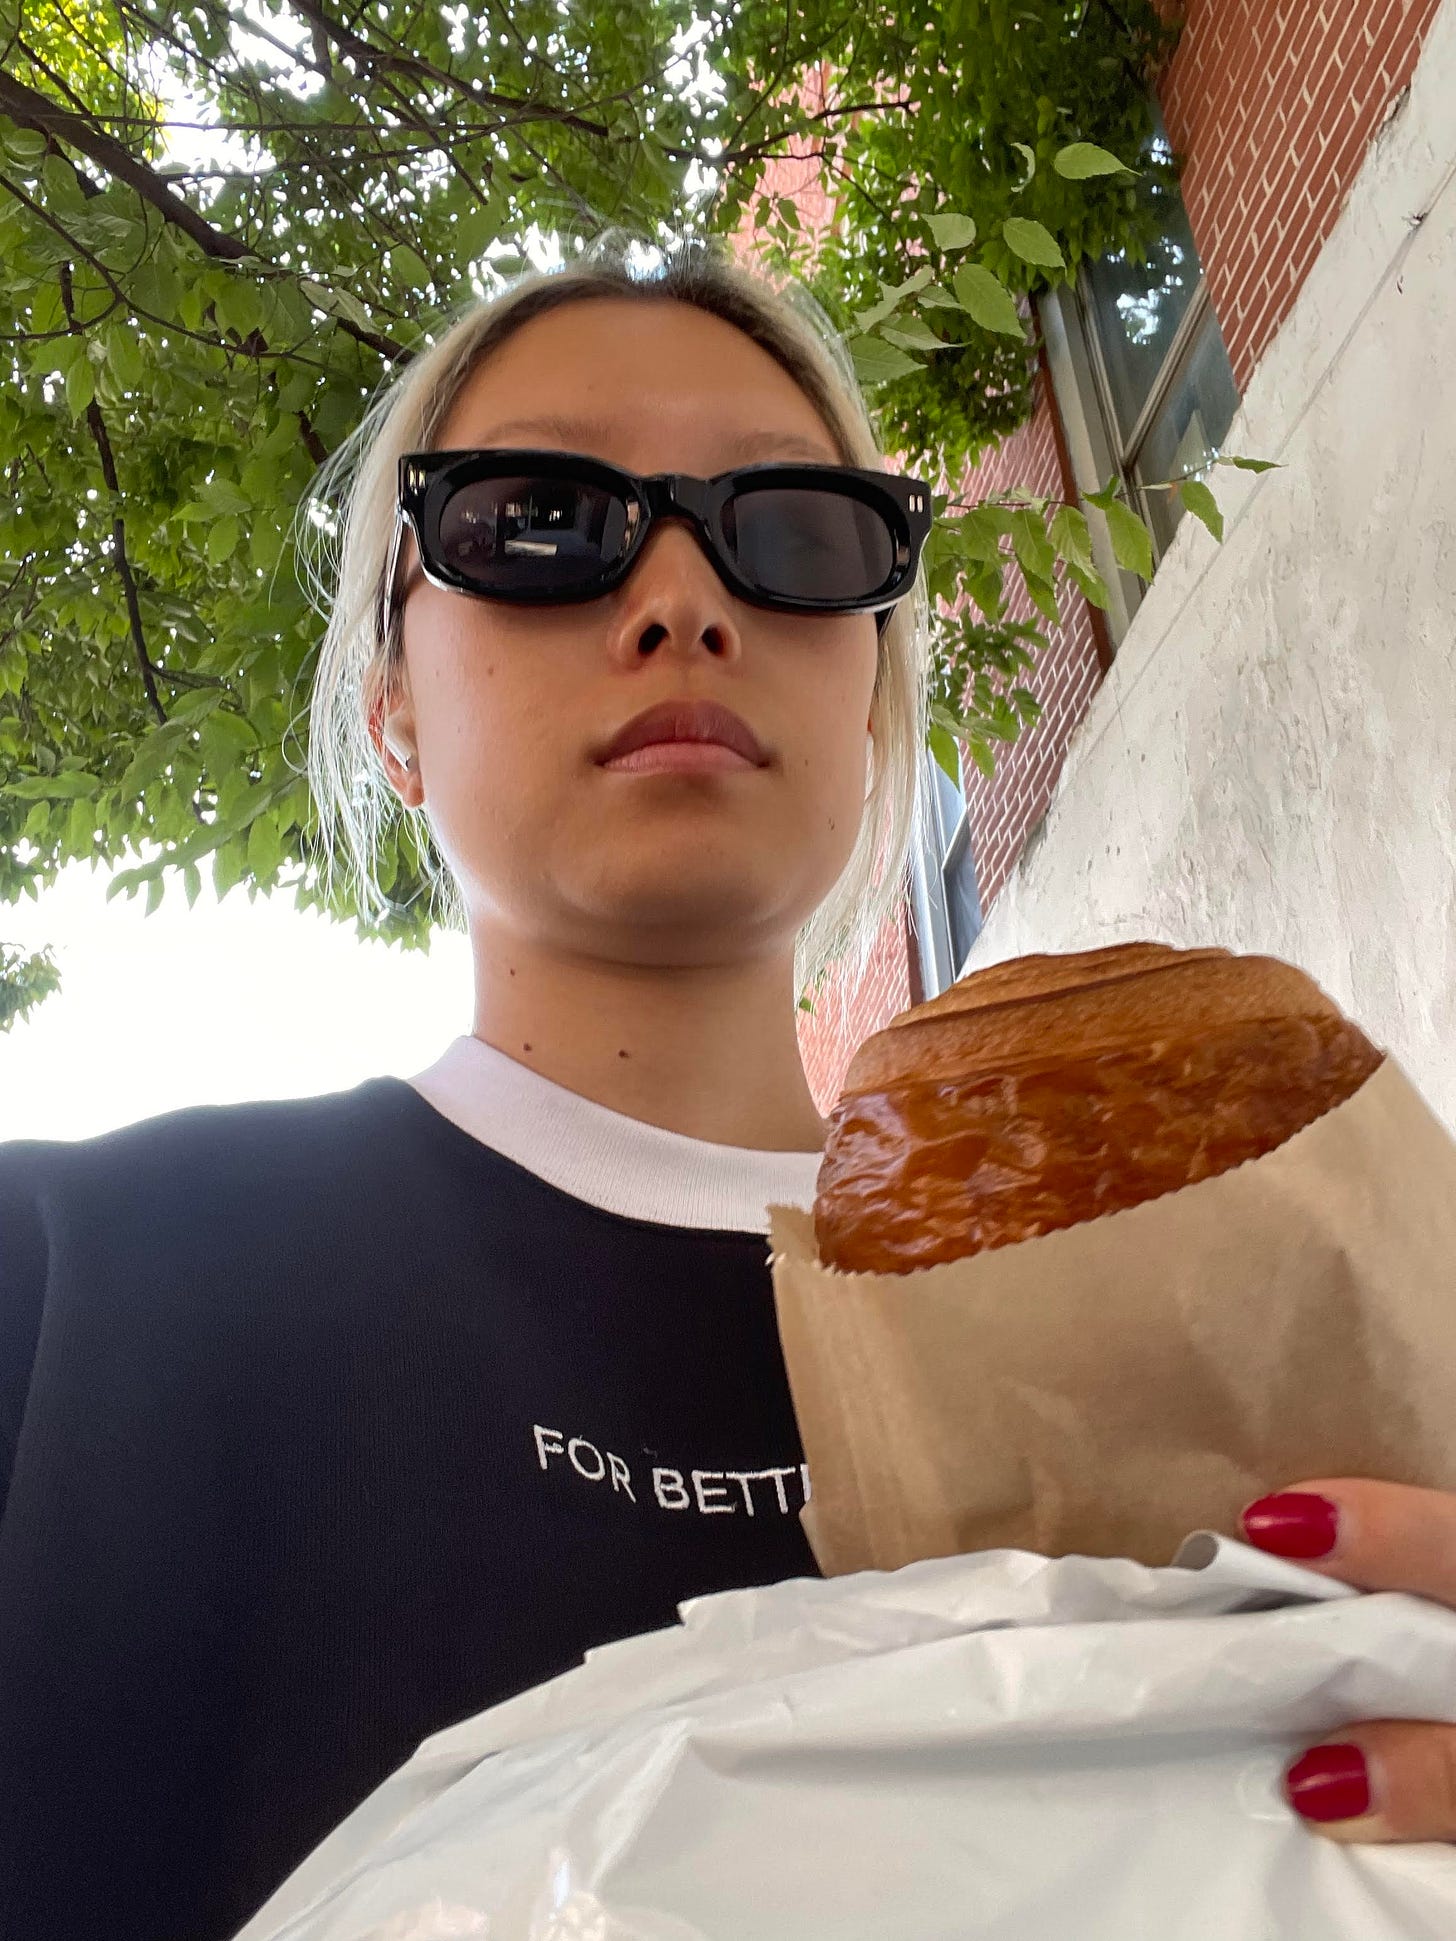 Delia Cai selfie with sunglasses walking while holding pastry